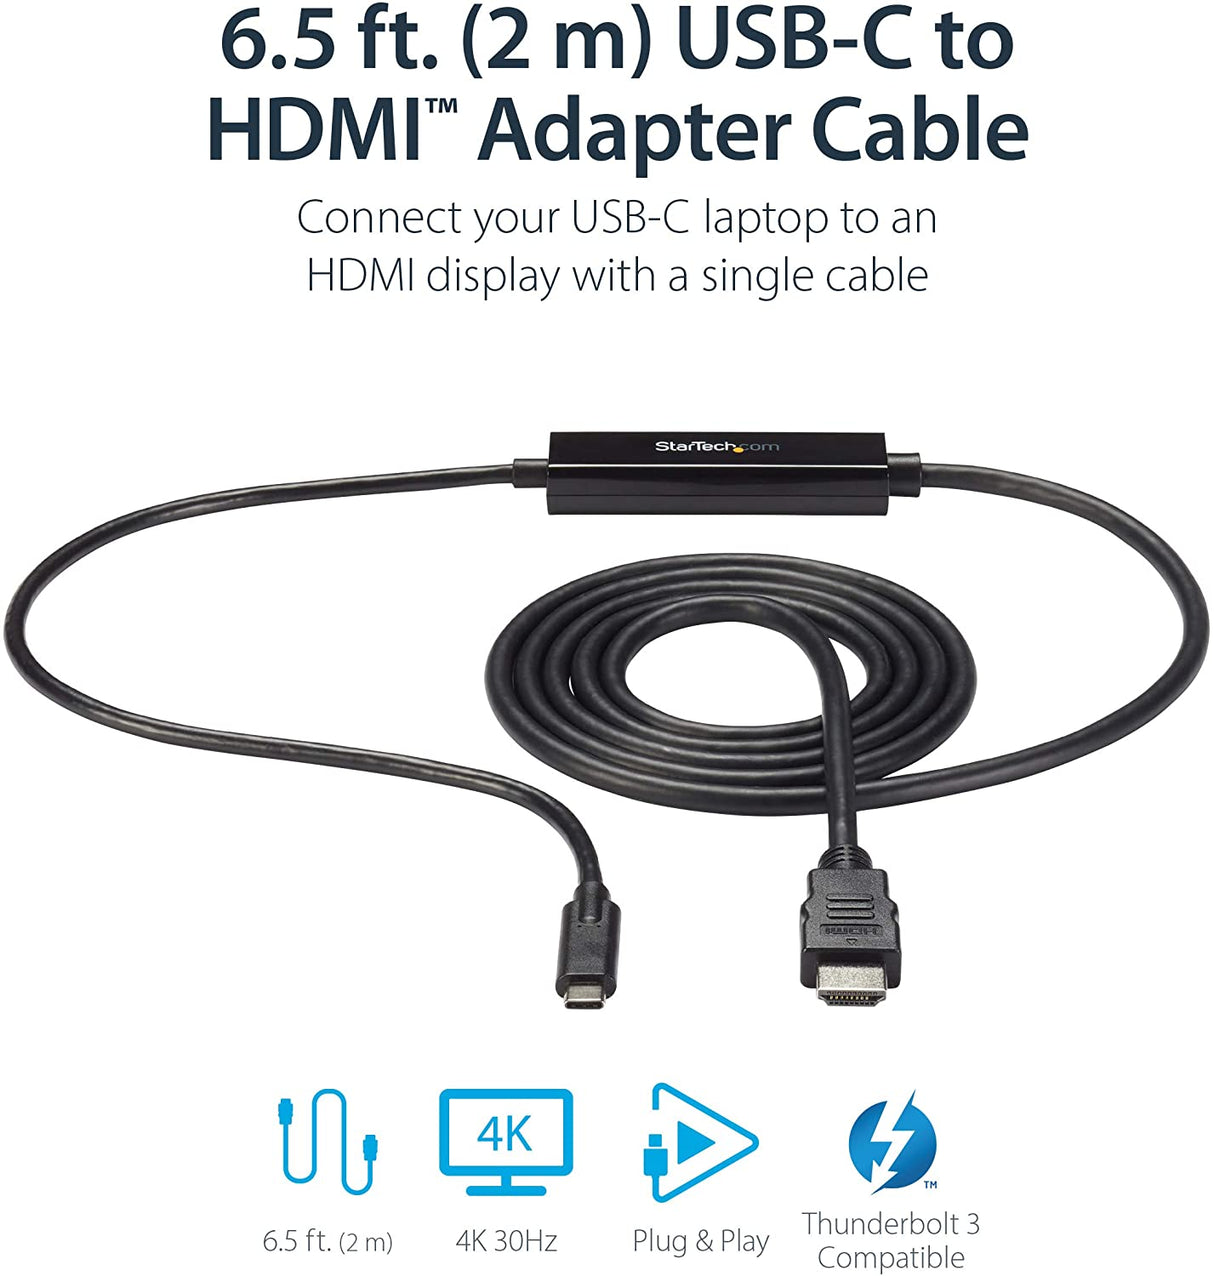 StarTech.com 6ft USB-C to HDMI Cable - USB Type-C to HDMI Adapter Cable - 4K 30Hz - Black (CDP2HDMM2MB) - Limited stock, see similar item CDP2HD2MBNL Black 6 ft / 2m